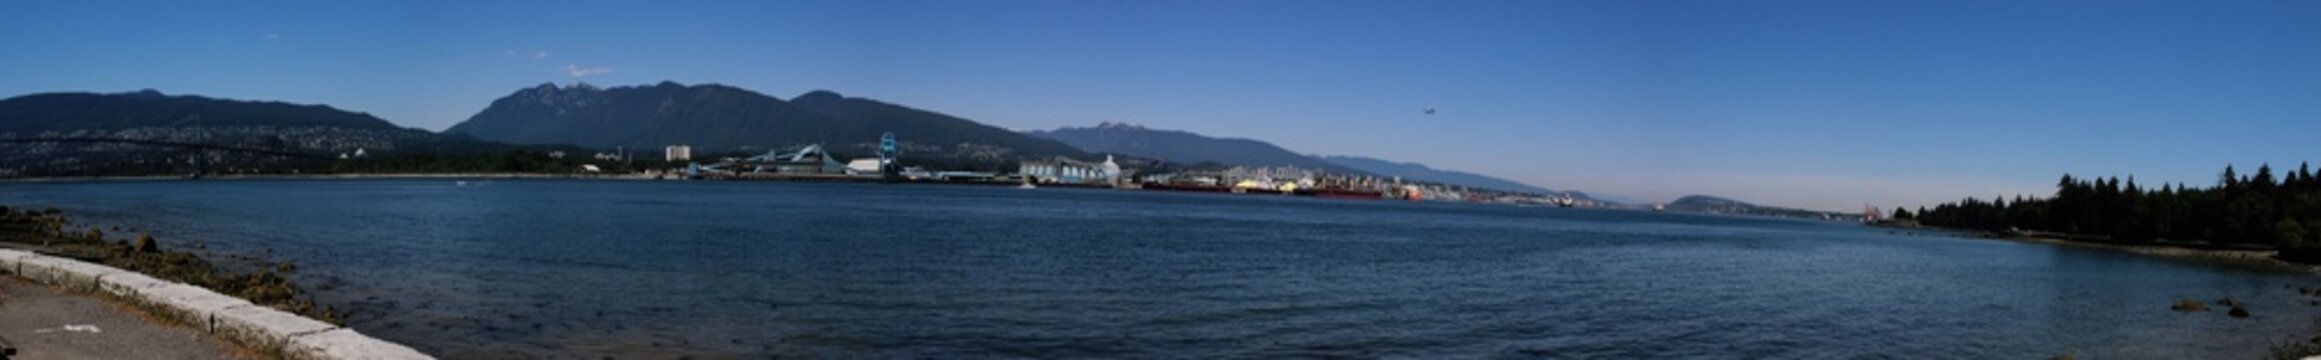 Huge panorama of the Vancouver waterfront from Stanley Park showing the lionsgate bridge, and the north side of the city